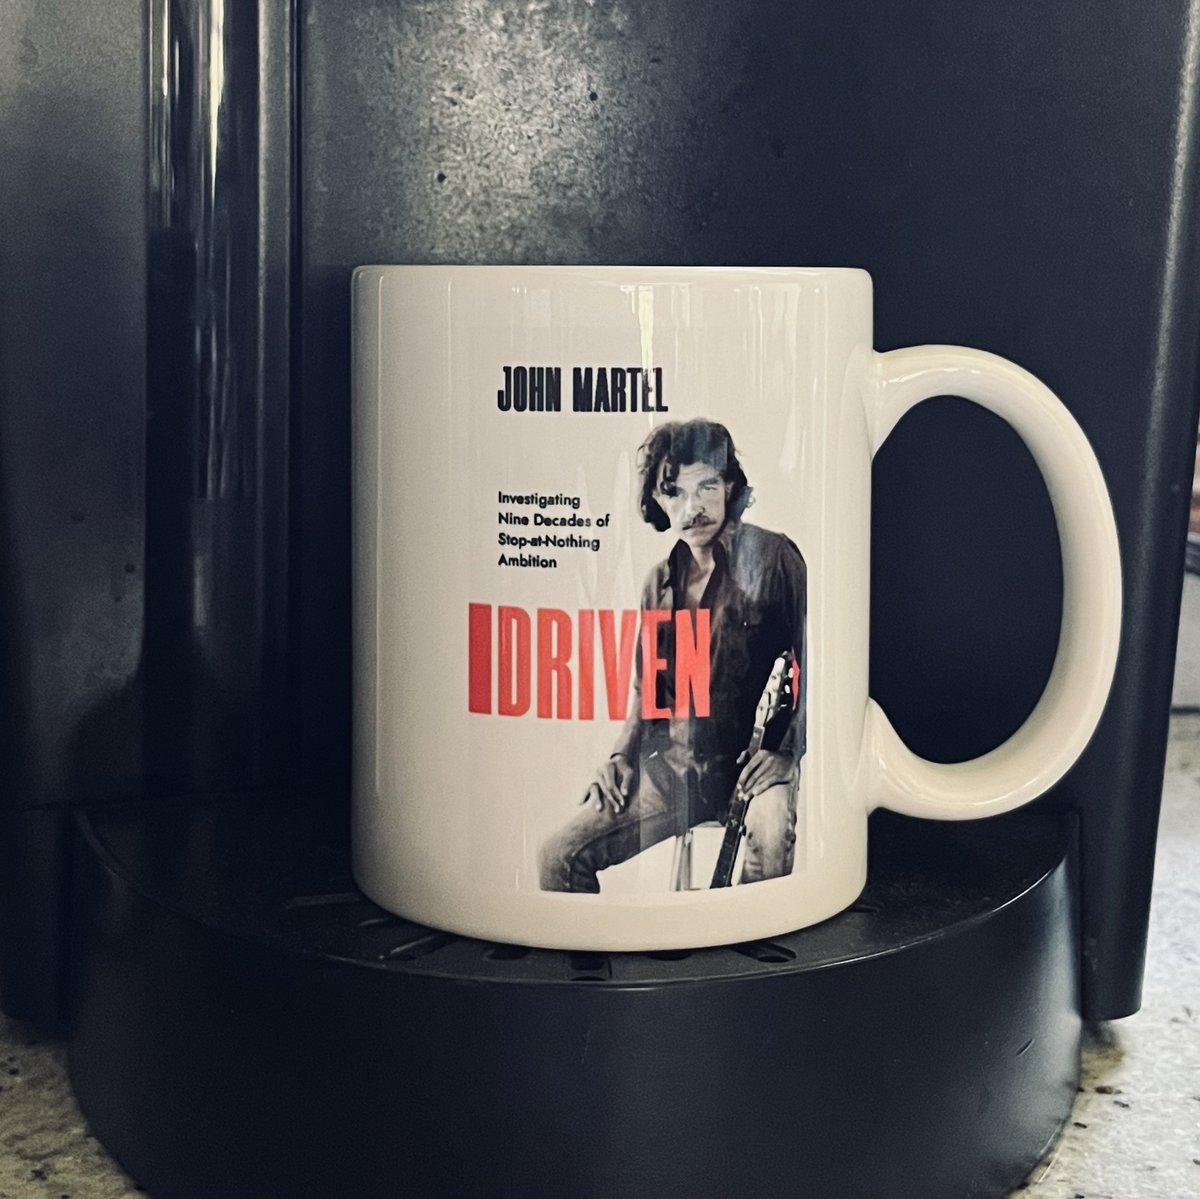 We don't have these cool mugs made for all our authors, but this 'mug' made the grade. We do create cool websites for any author who wants one. #smallpress #indiepublishing #fullservice #creative #outofthebox
johnmartel.com